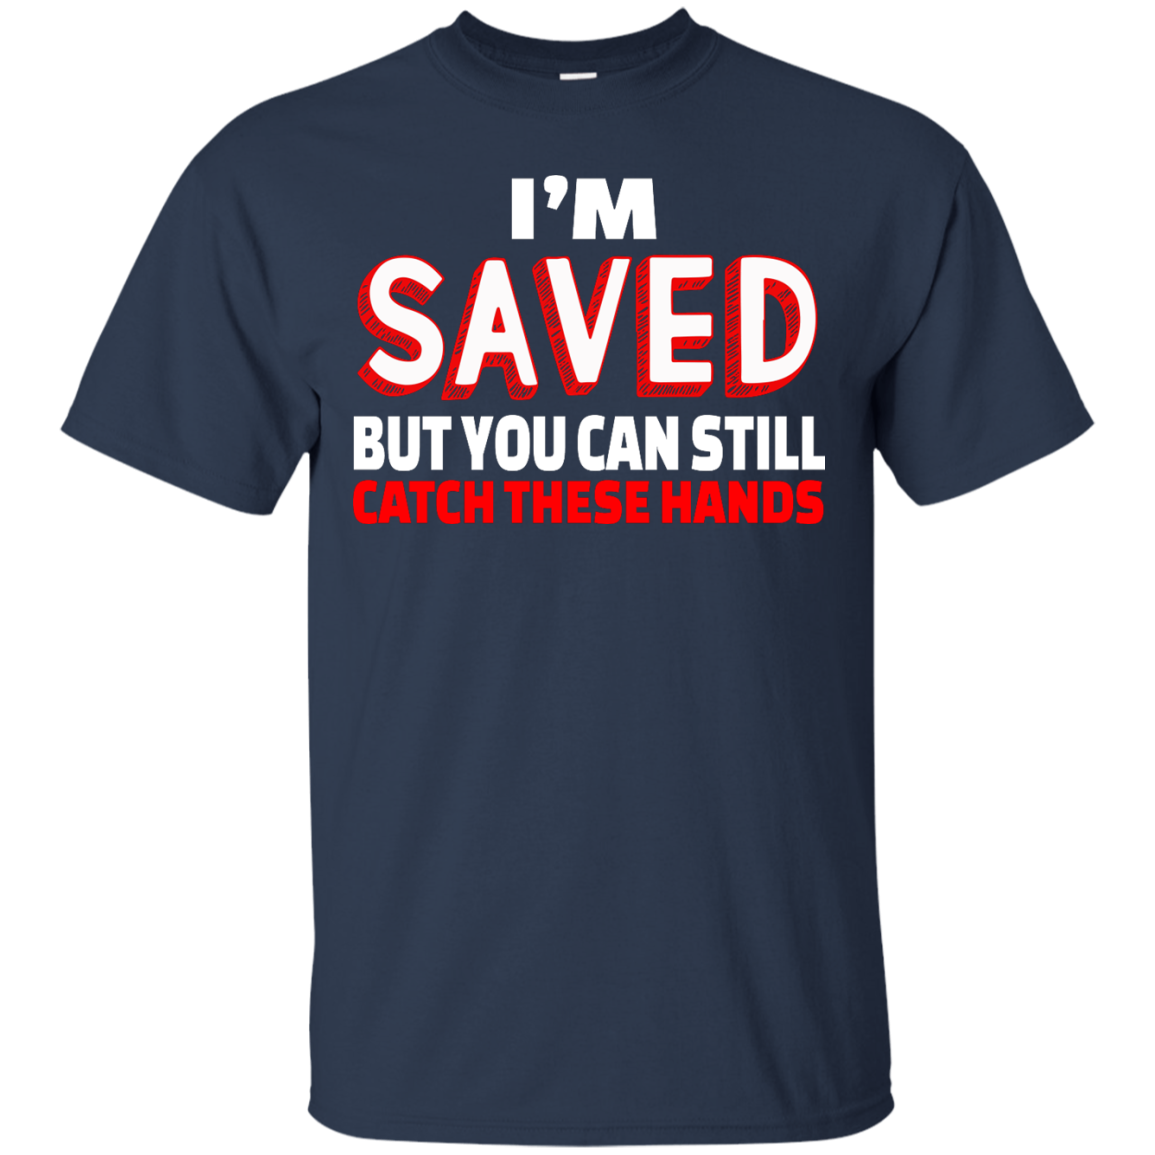 I'm Saved But You Can Still Catch These Hands shirt, tank, racerback